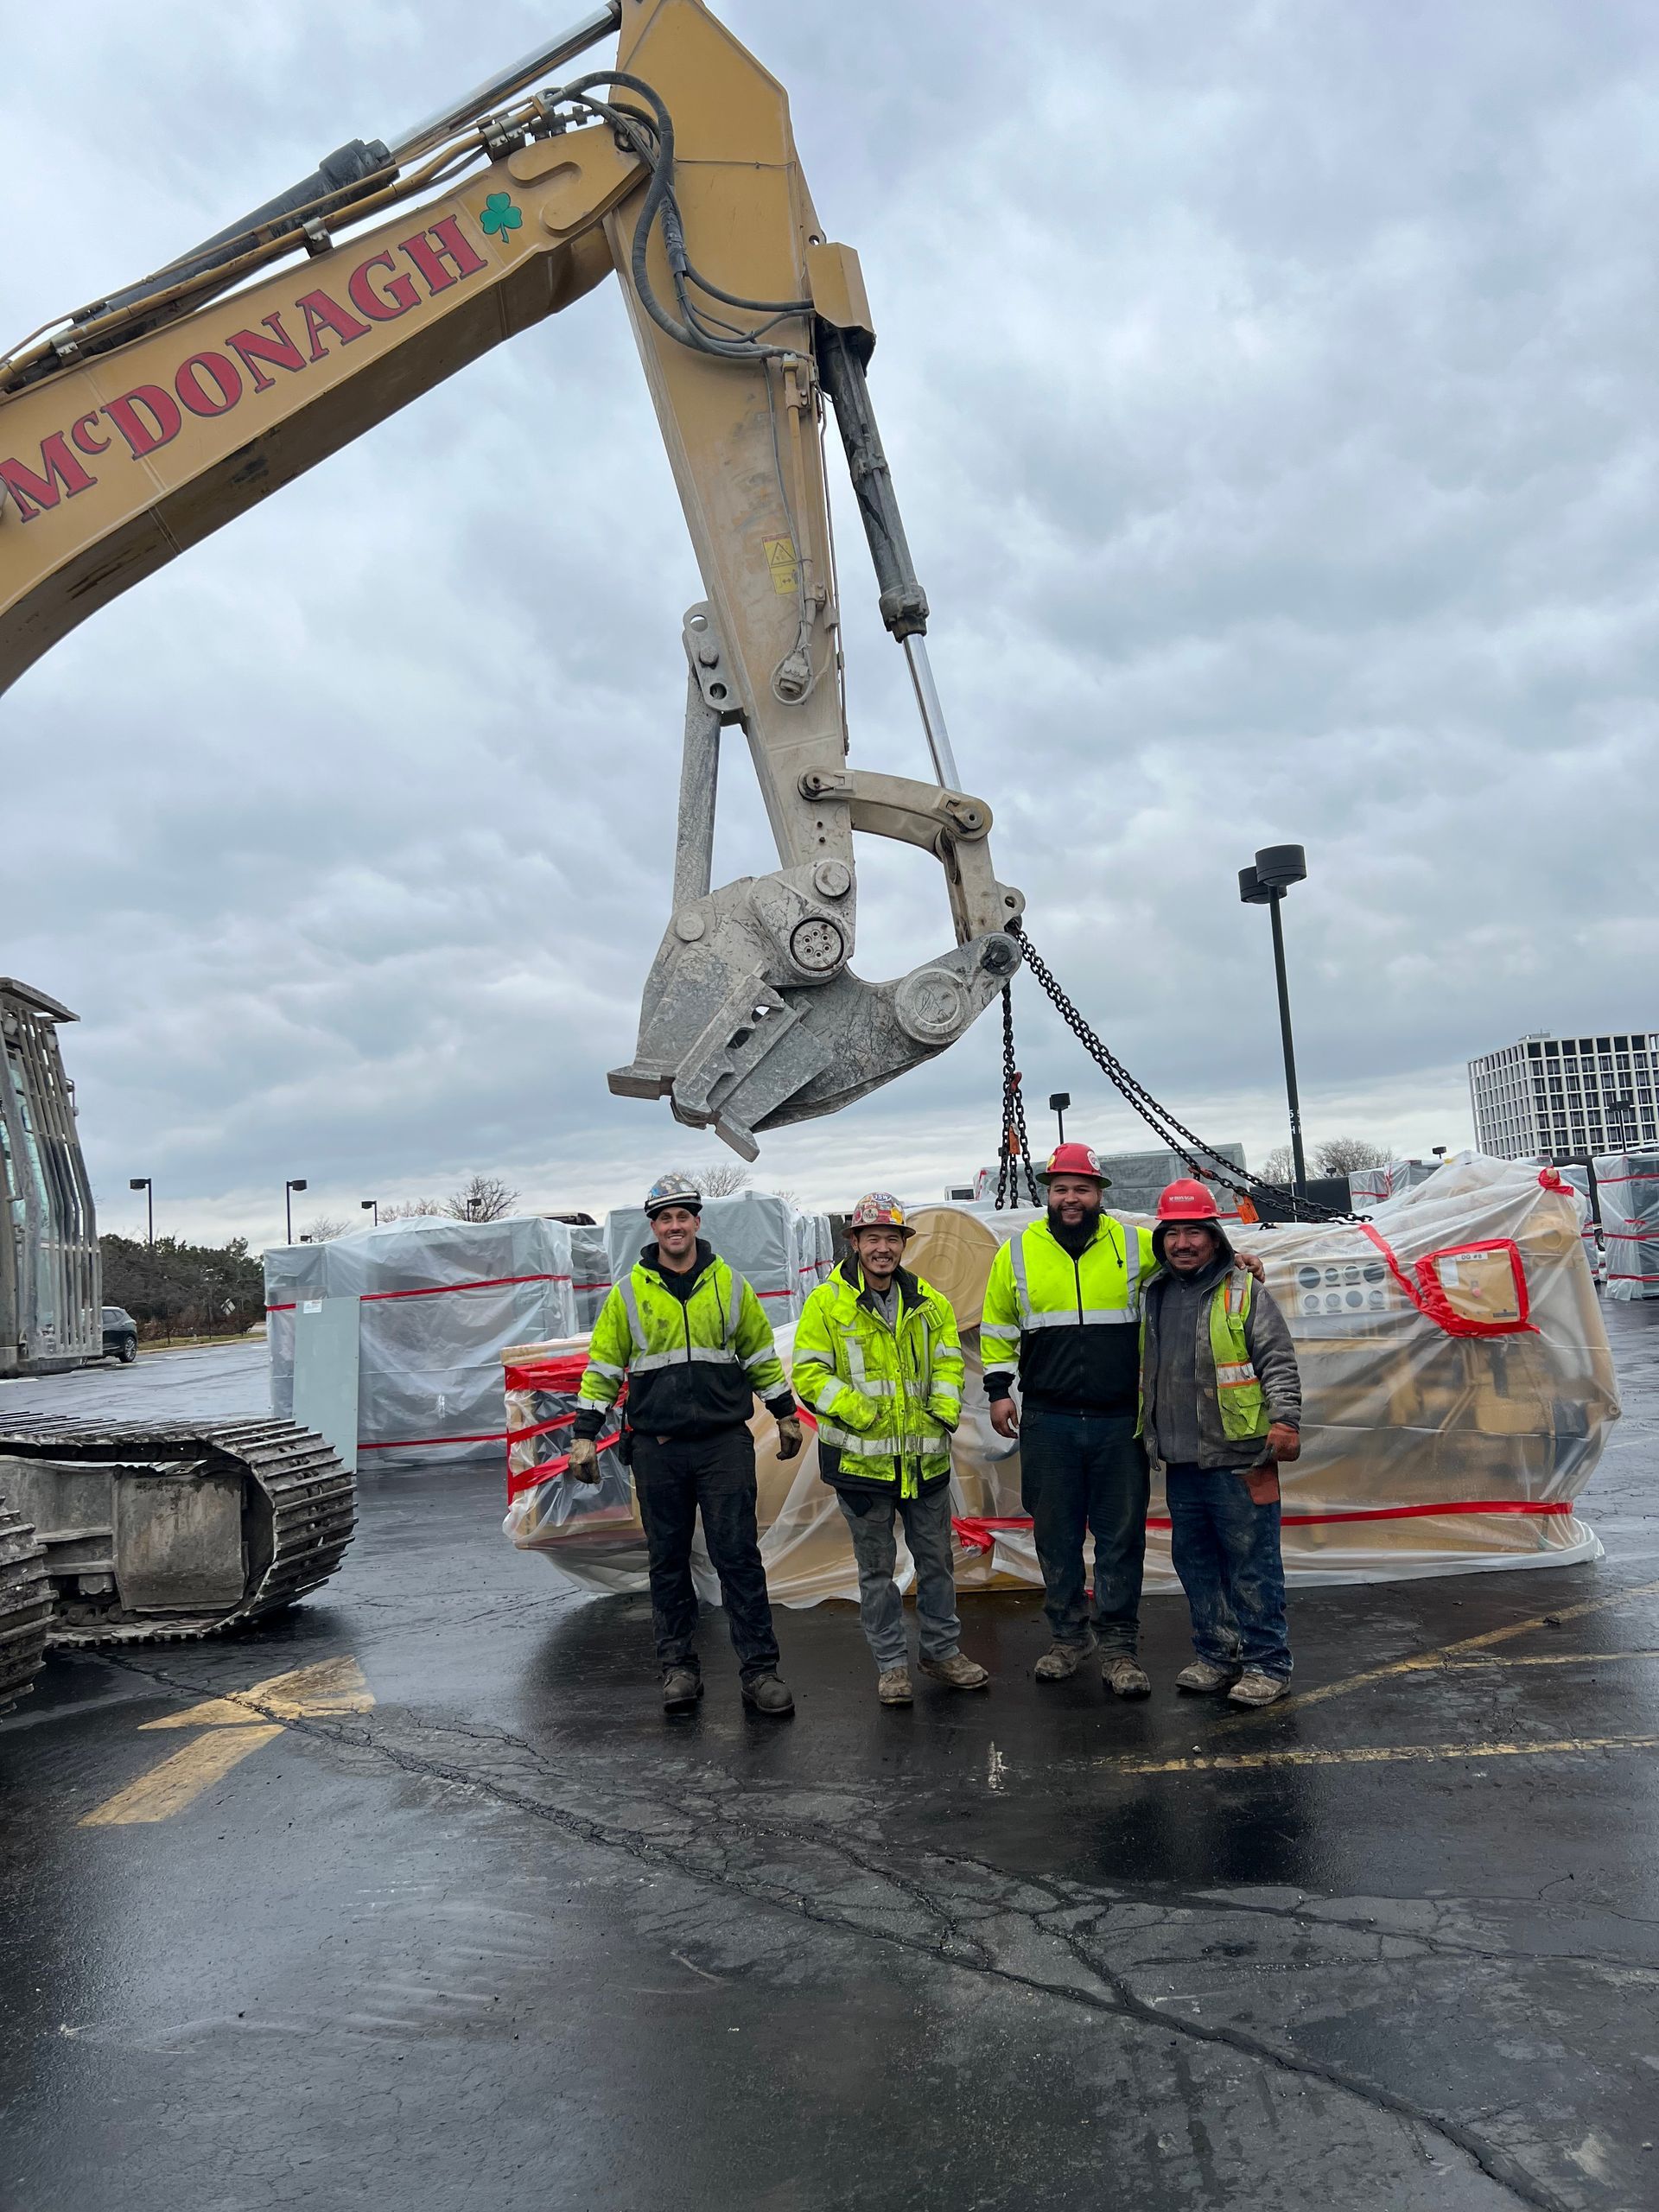 A group of men standing in front of a mcdonald 's excavator